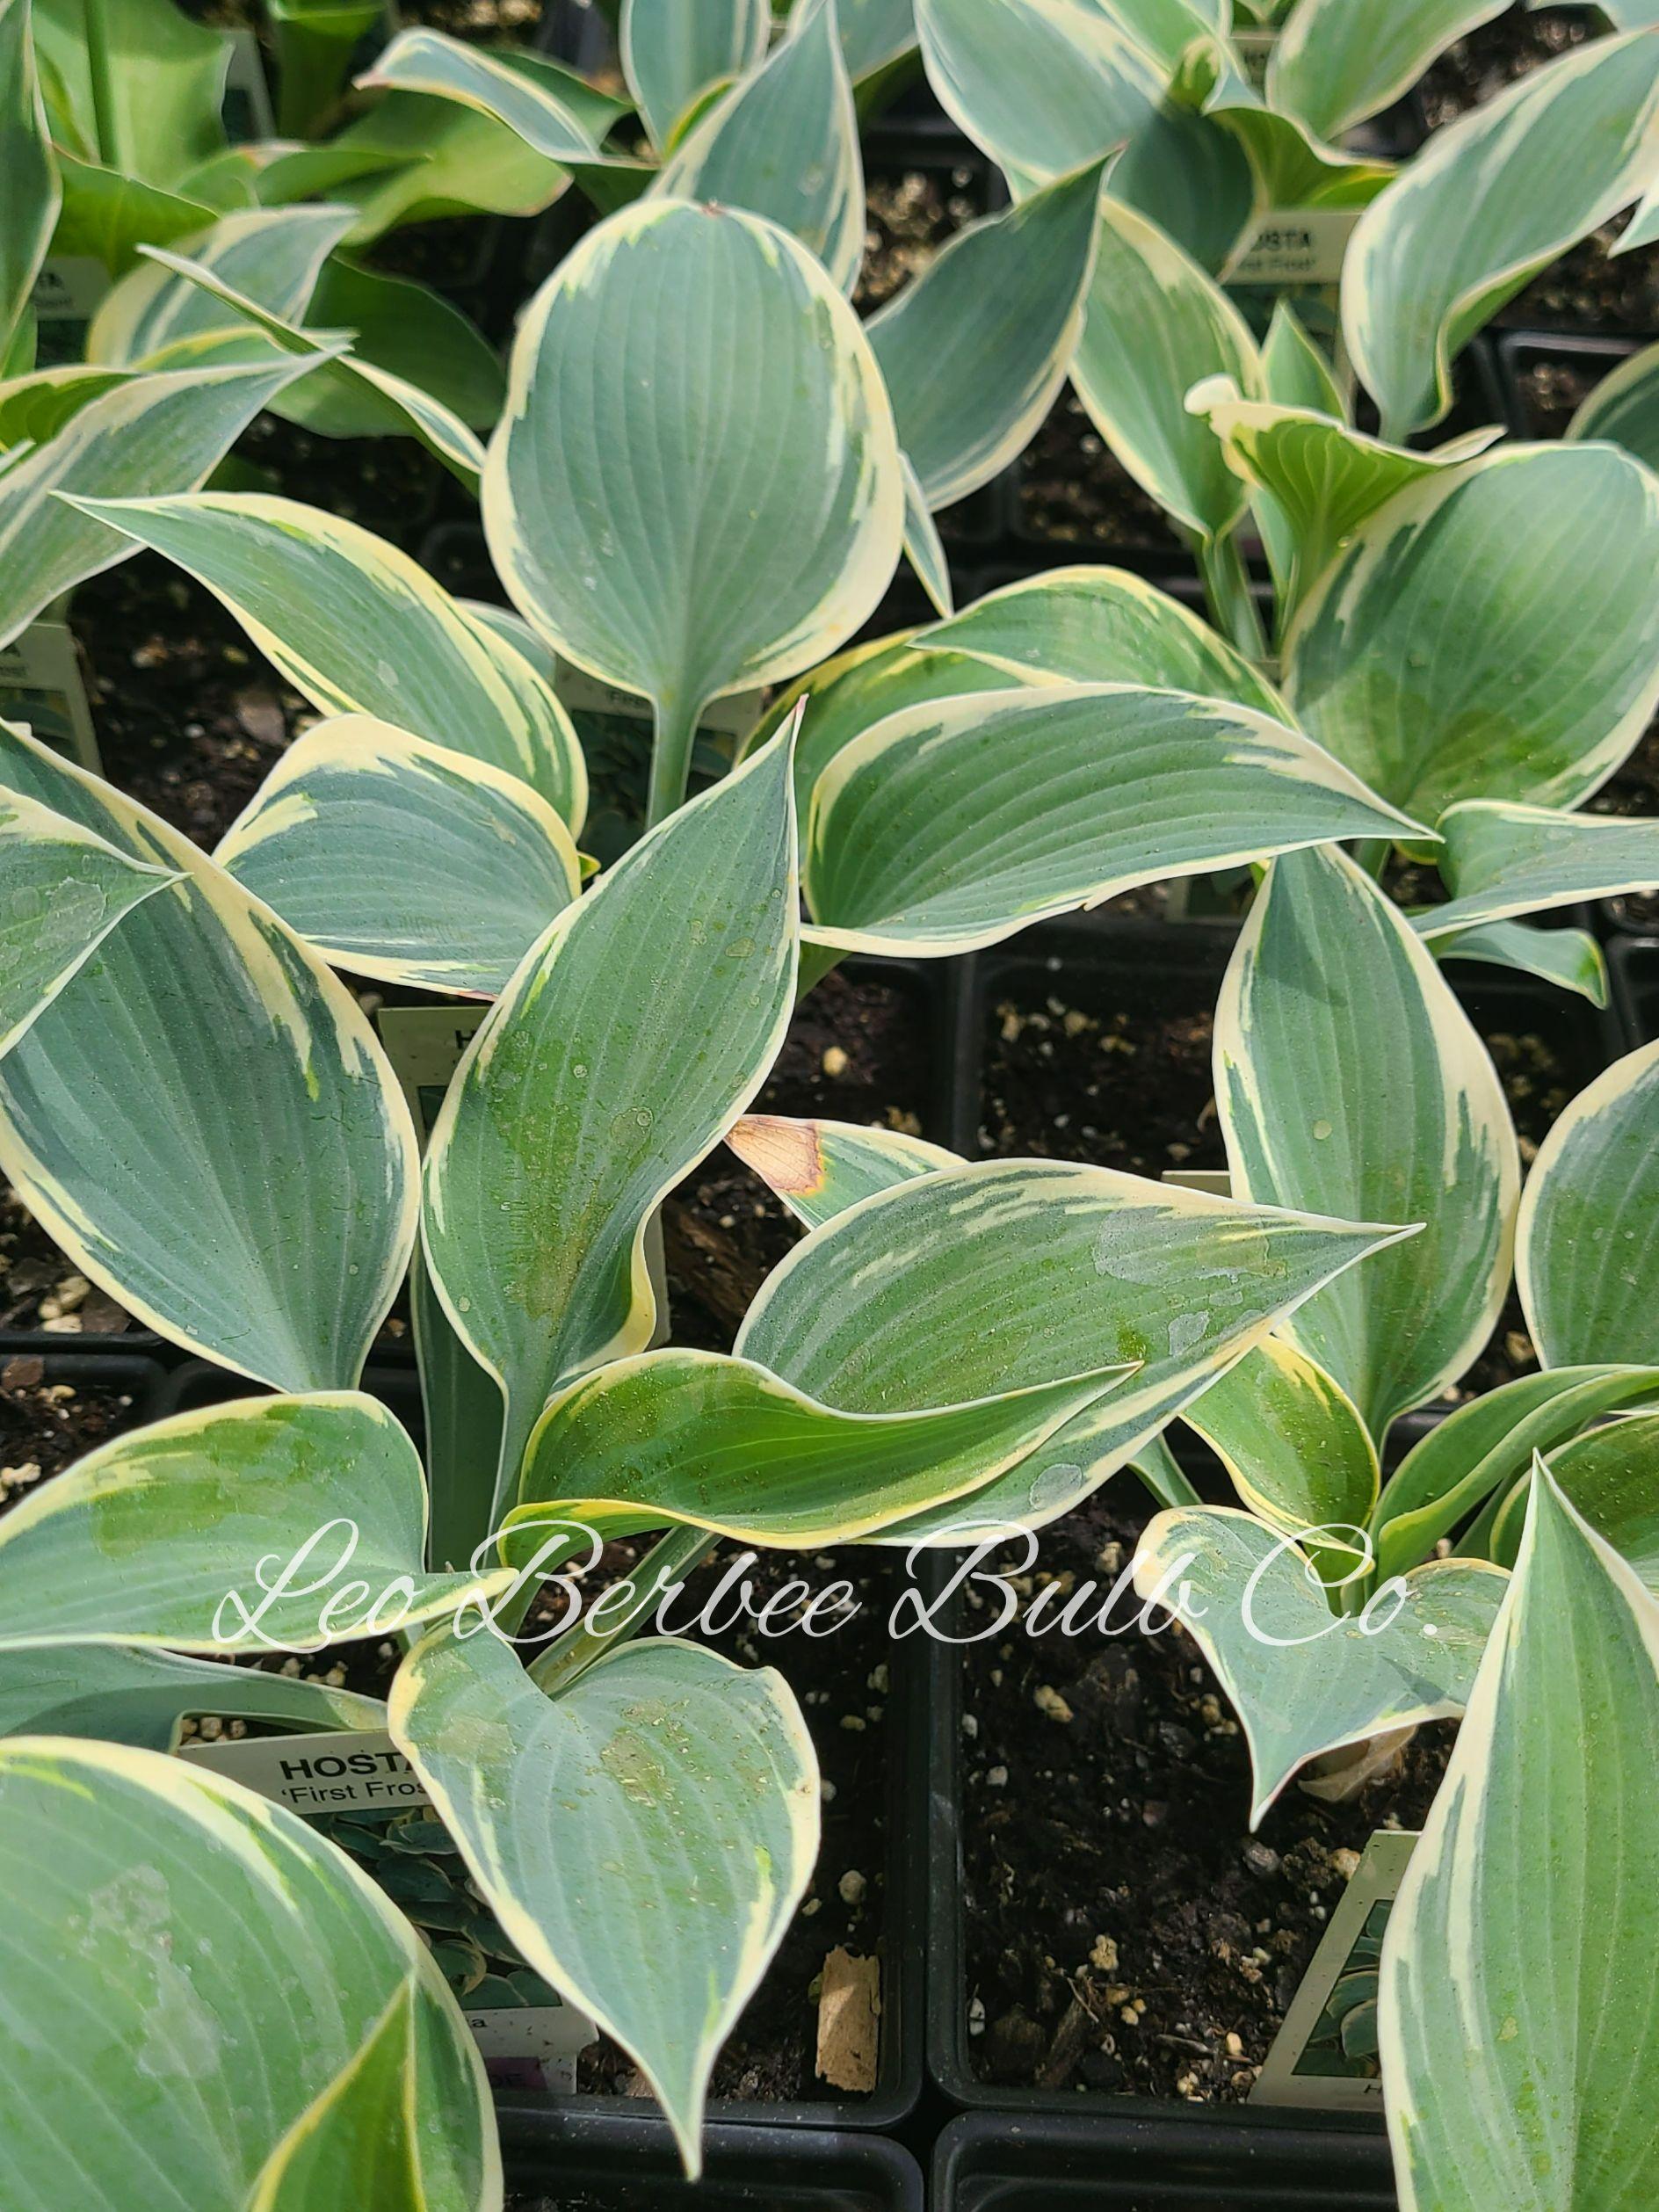 Hosta First Frost from Leo Berbee Bulb Company